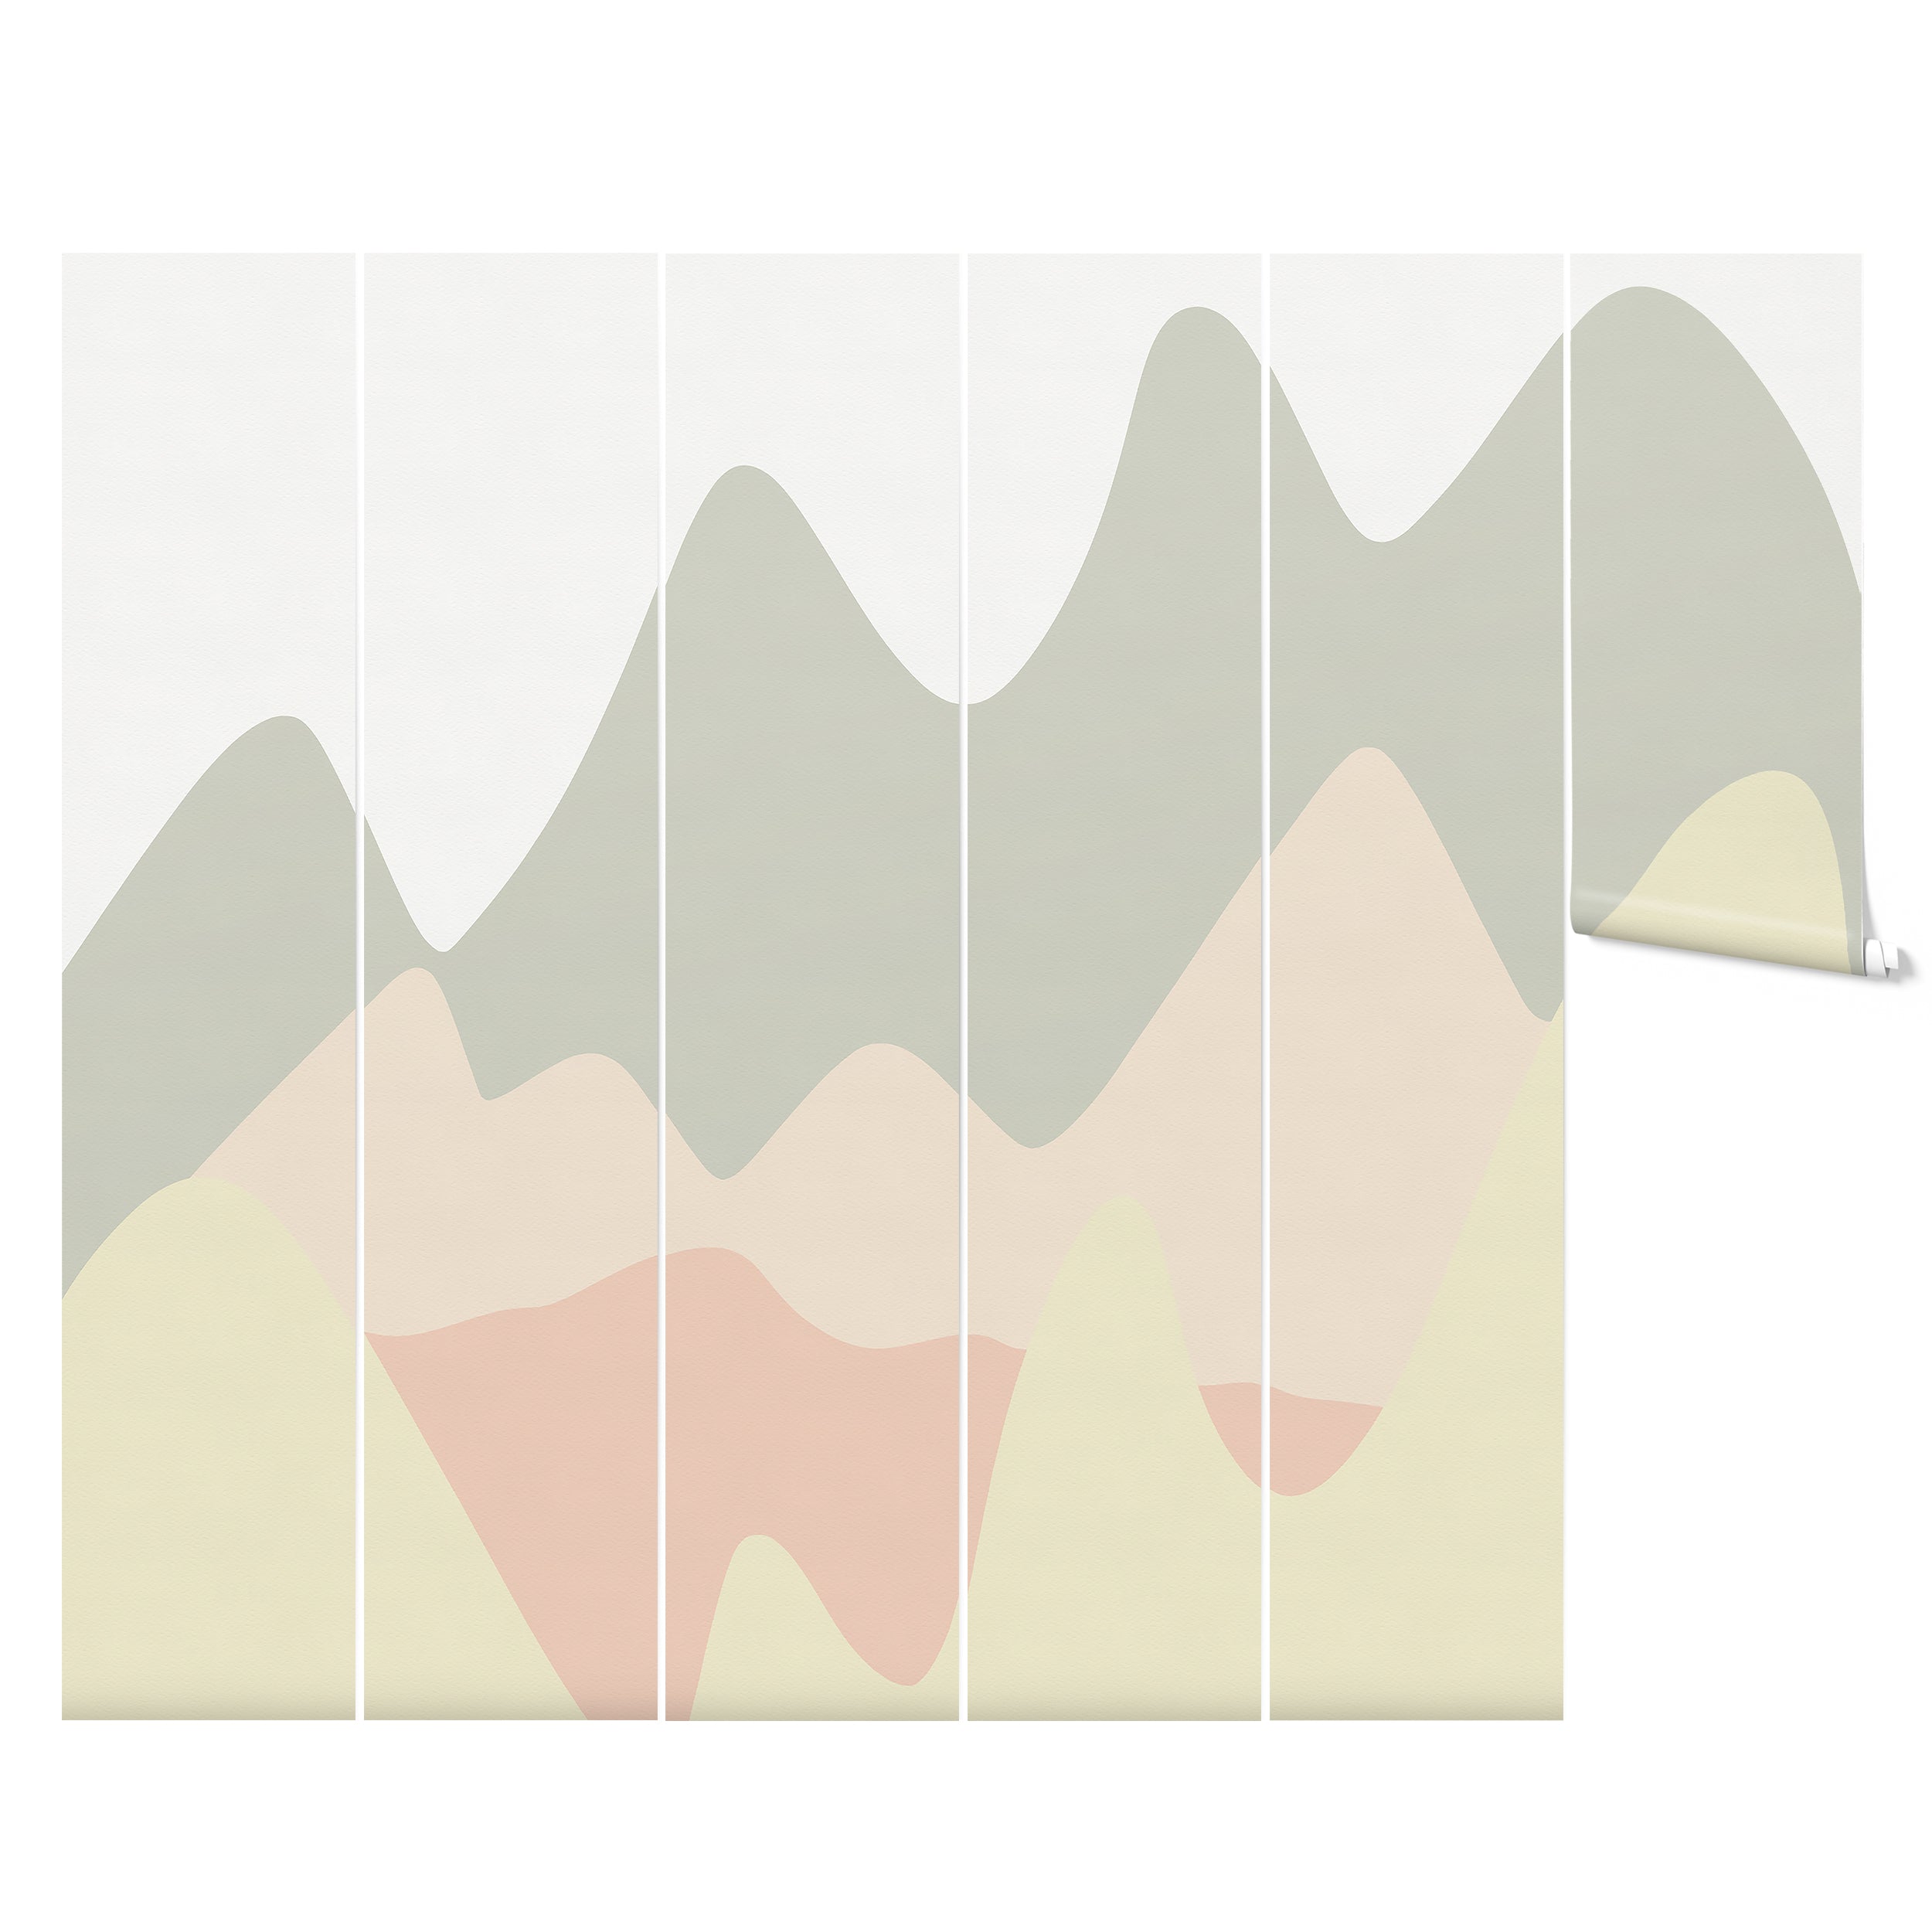 Mockup of the Pastel Hills Mural roll, showcasing the full abstract design of wavy pastel hills in soft shades of green, pink, and beige, perfect for adding a touch of serenity to any child's room